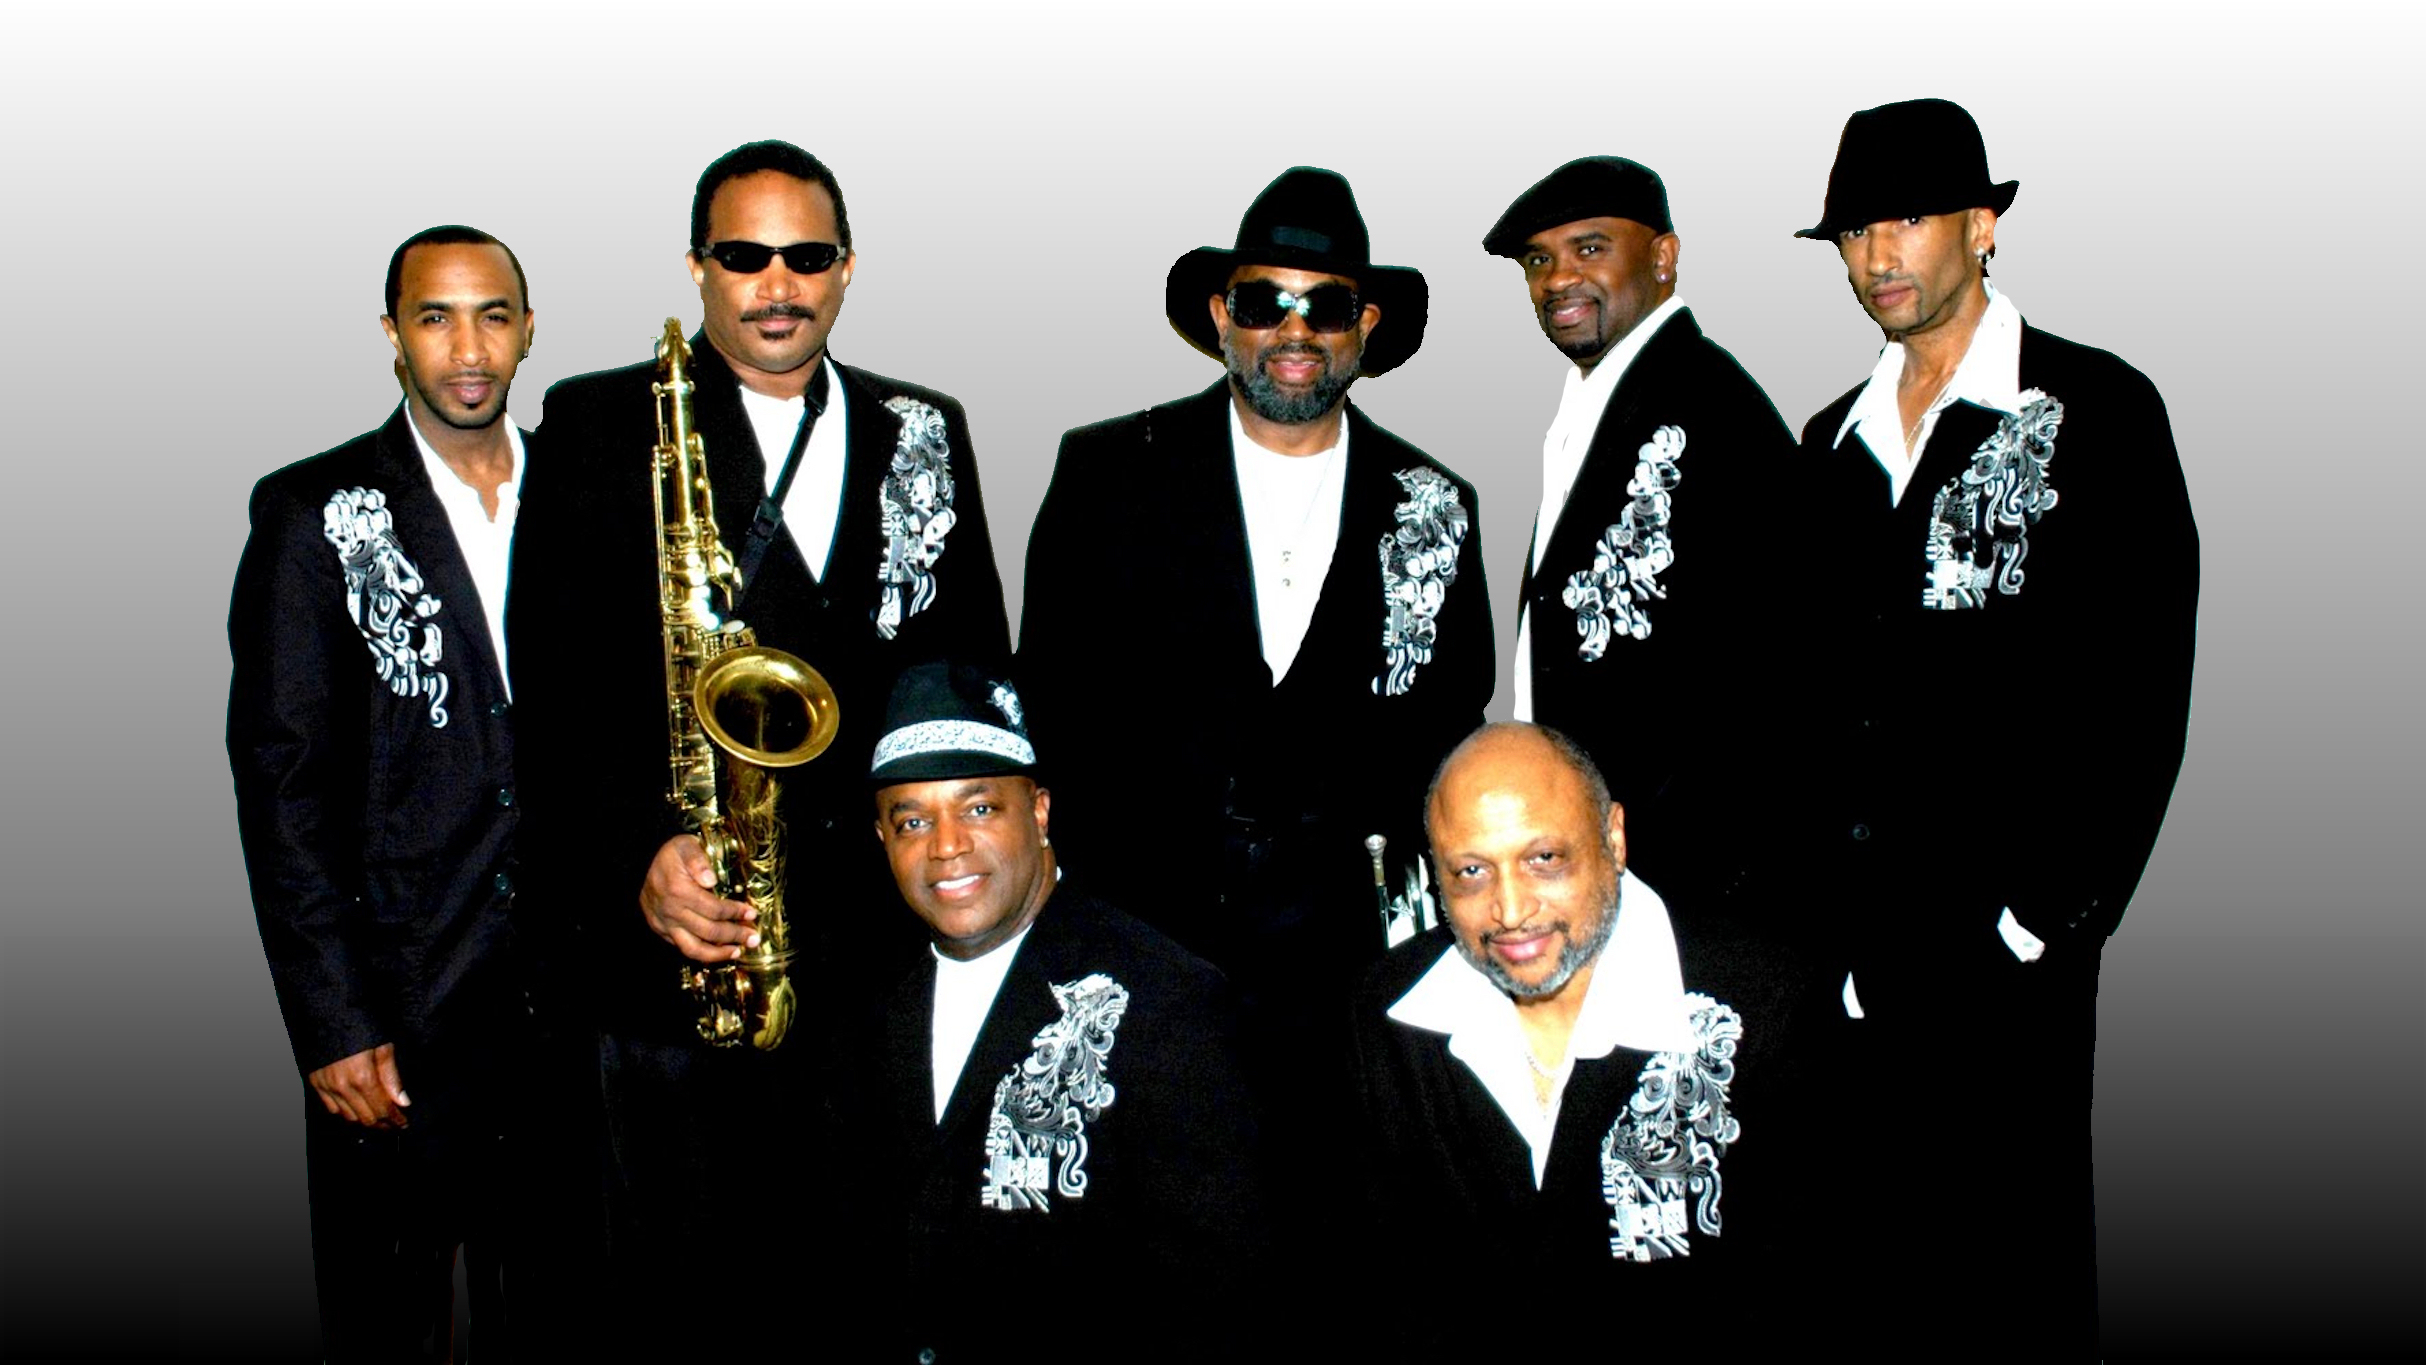 FunkSoul Legends: Con Funk Shun, Rose Royce and Yarbrough & Peoples